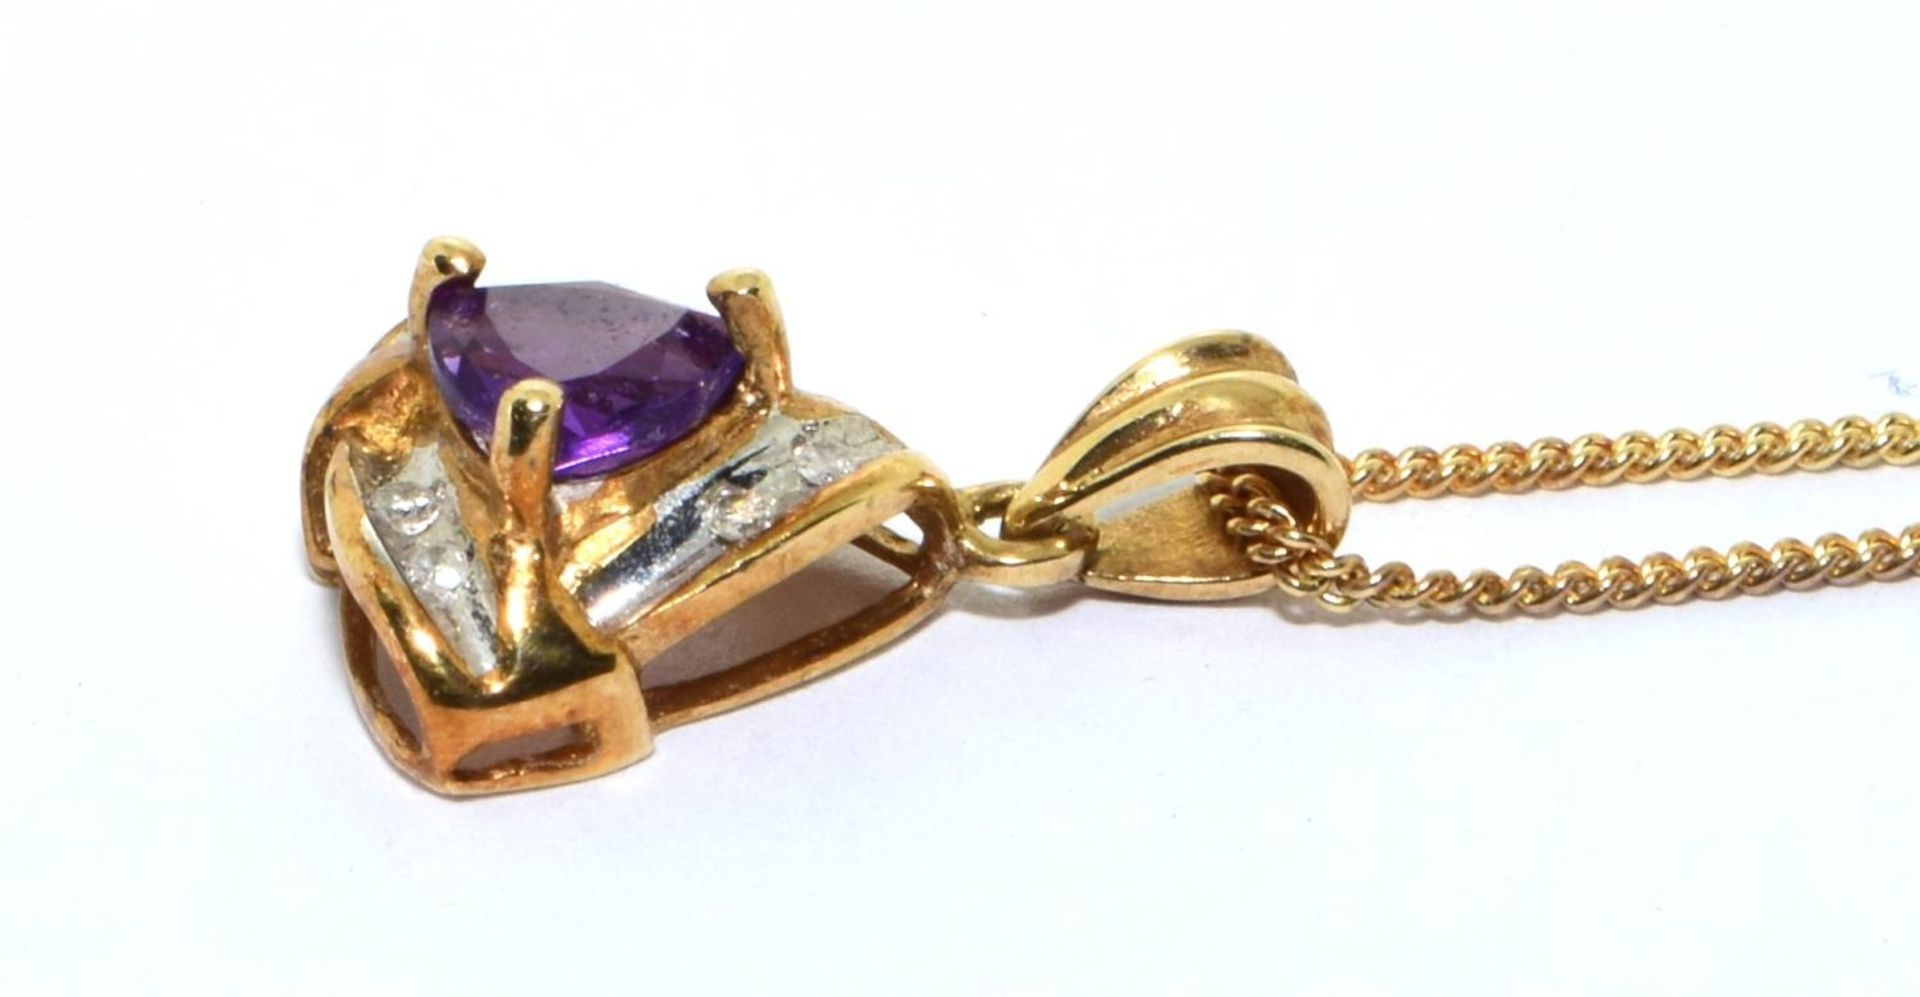 9ct gold Diamond and Amethyst pendant necklace with a chain of 46cm - Image 4 of 6